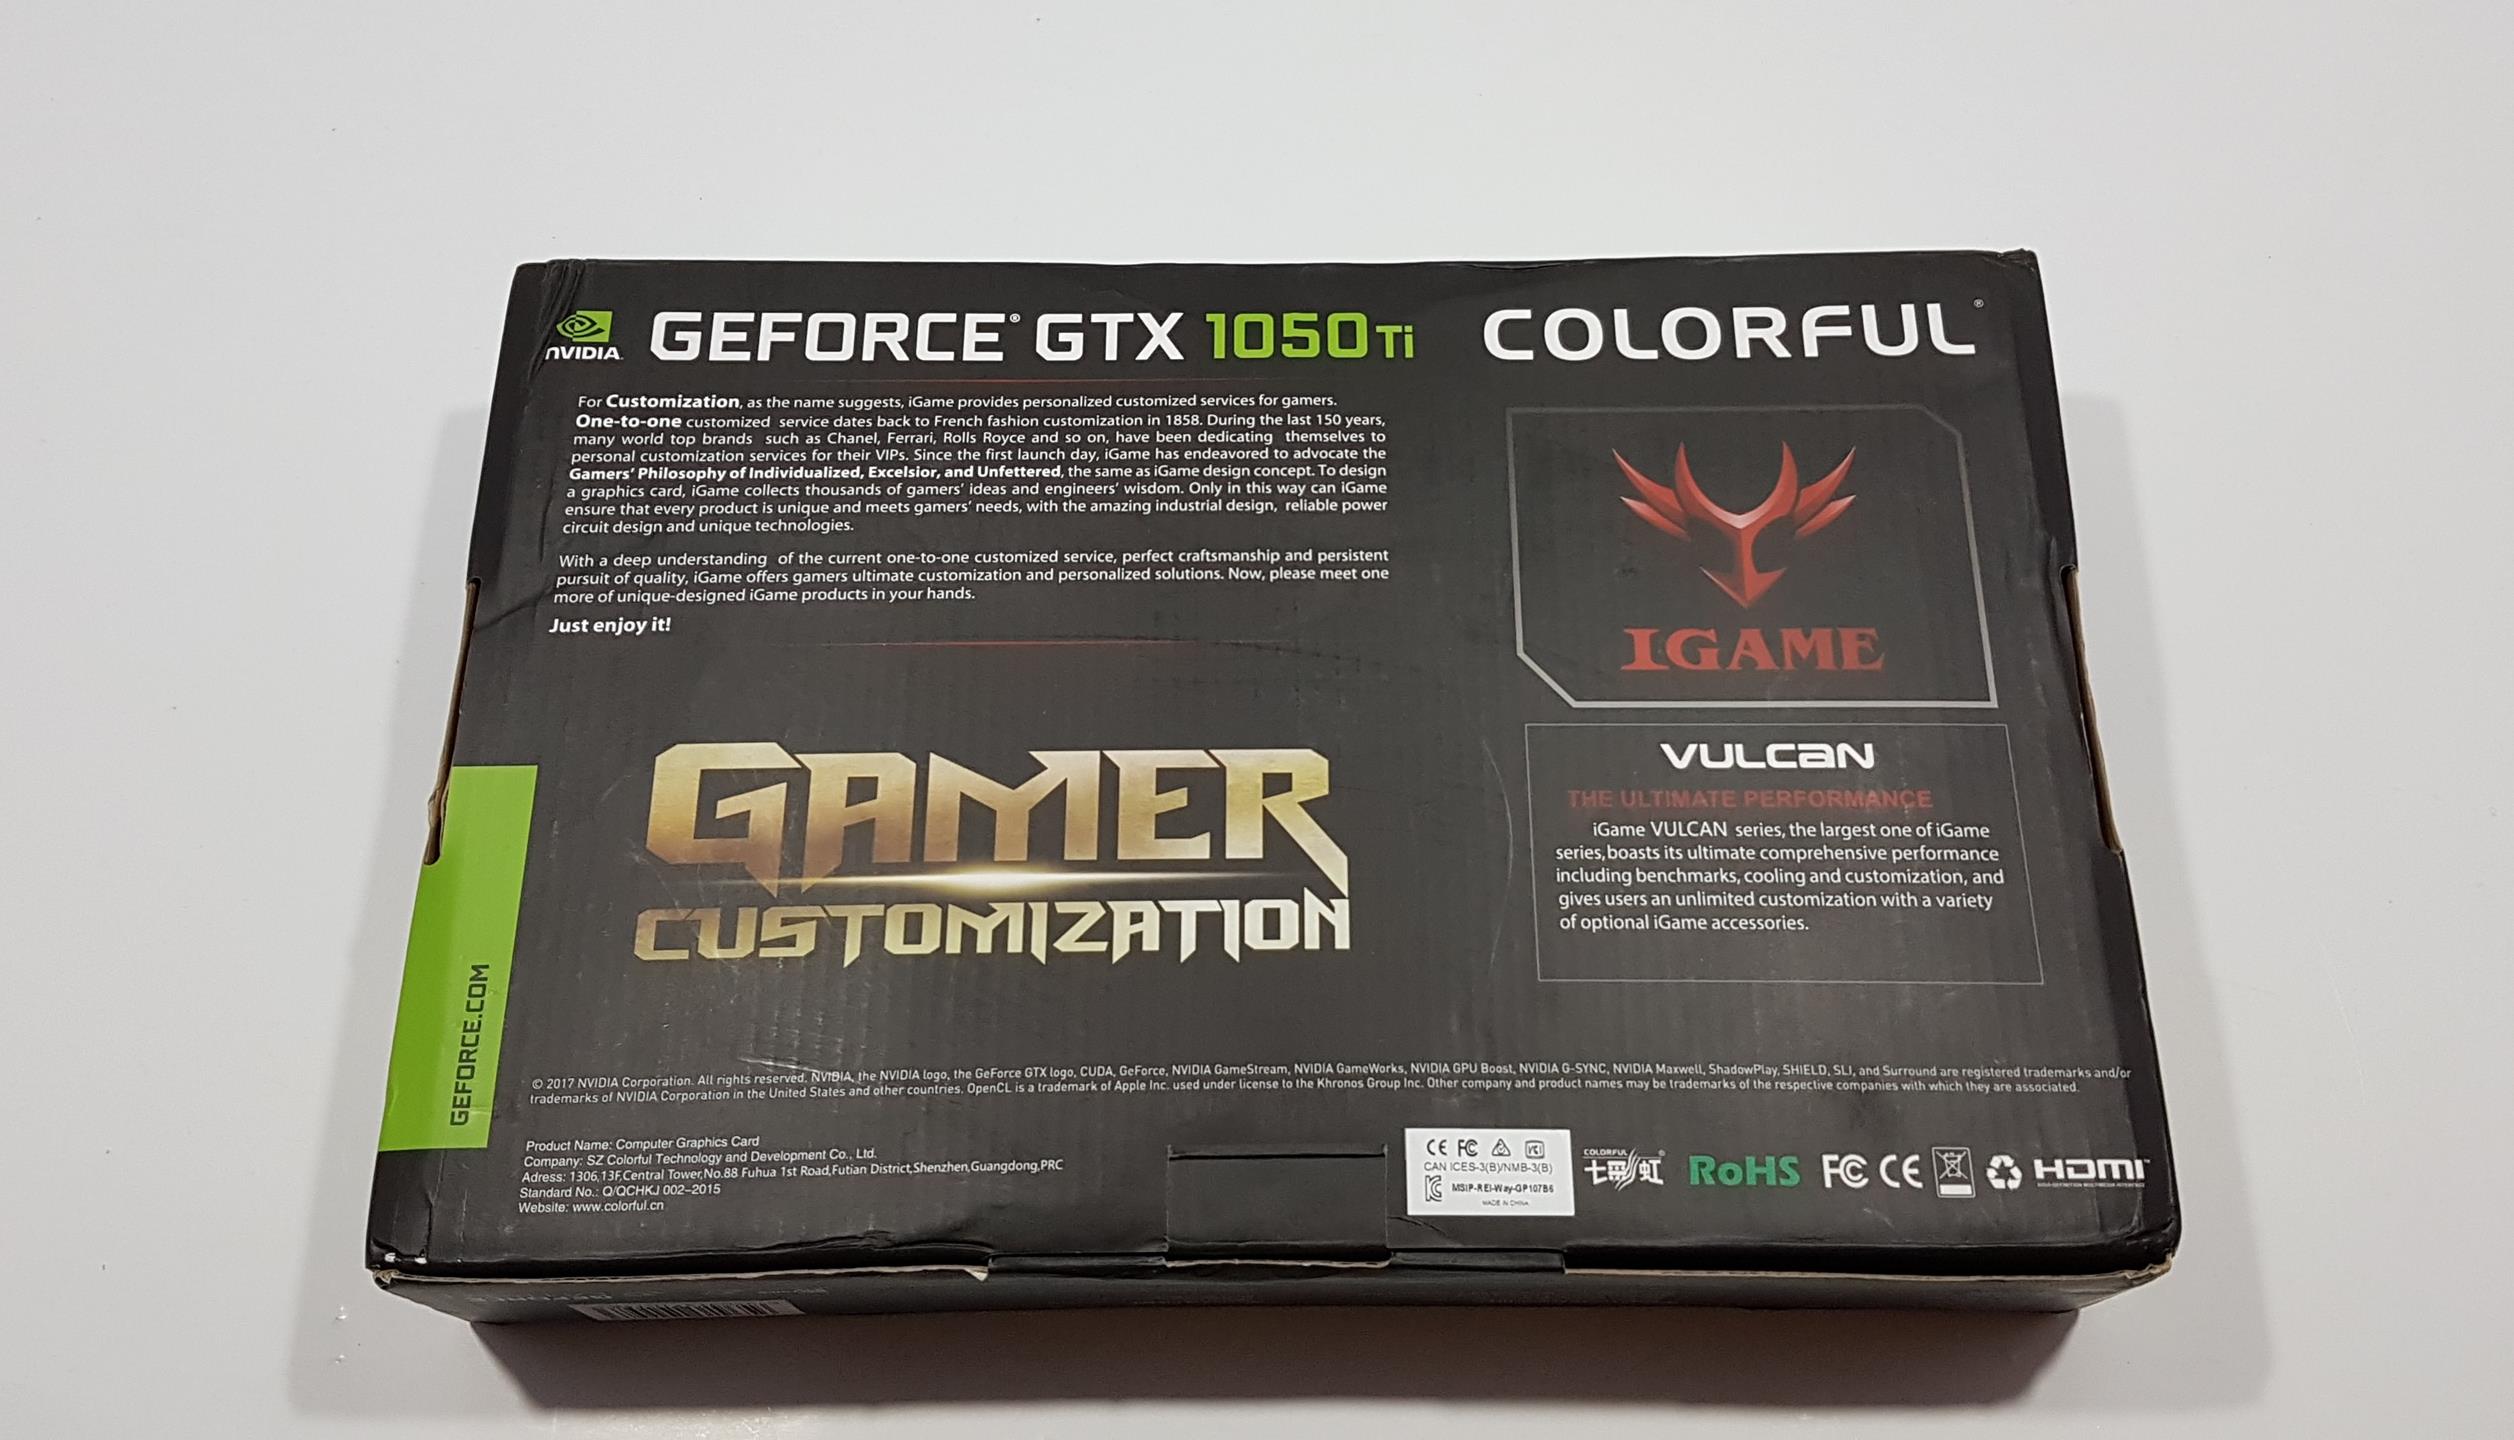 Colorful Gtx 1050 ti Backside Packaging 